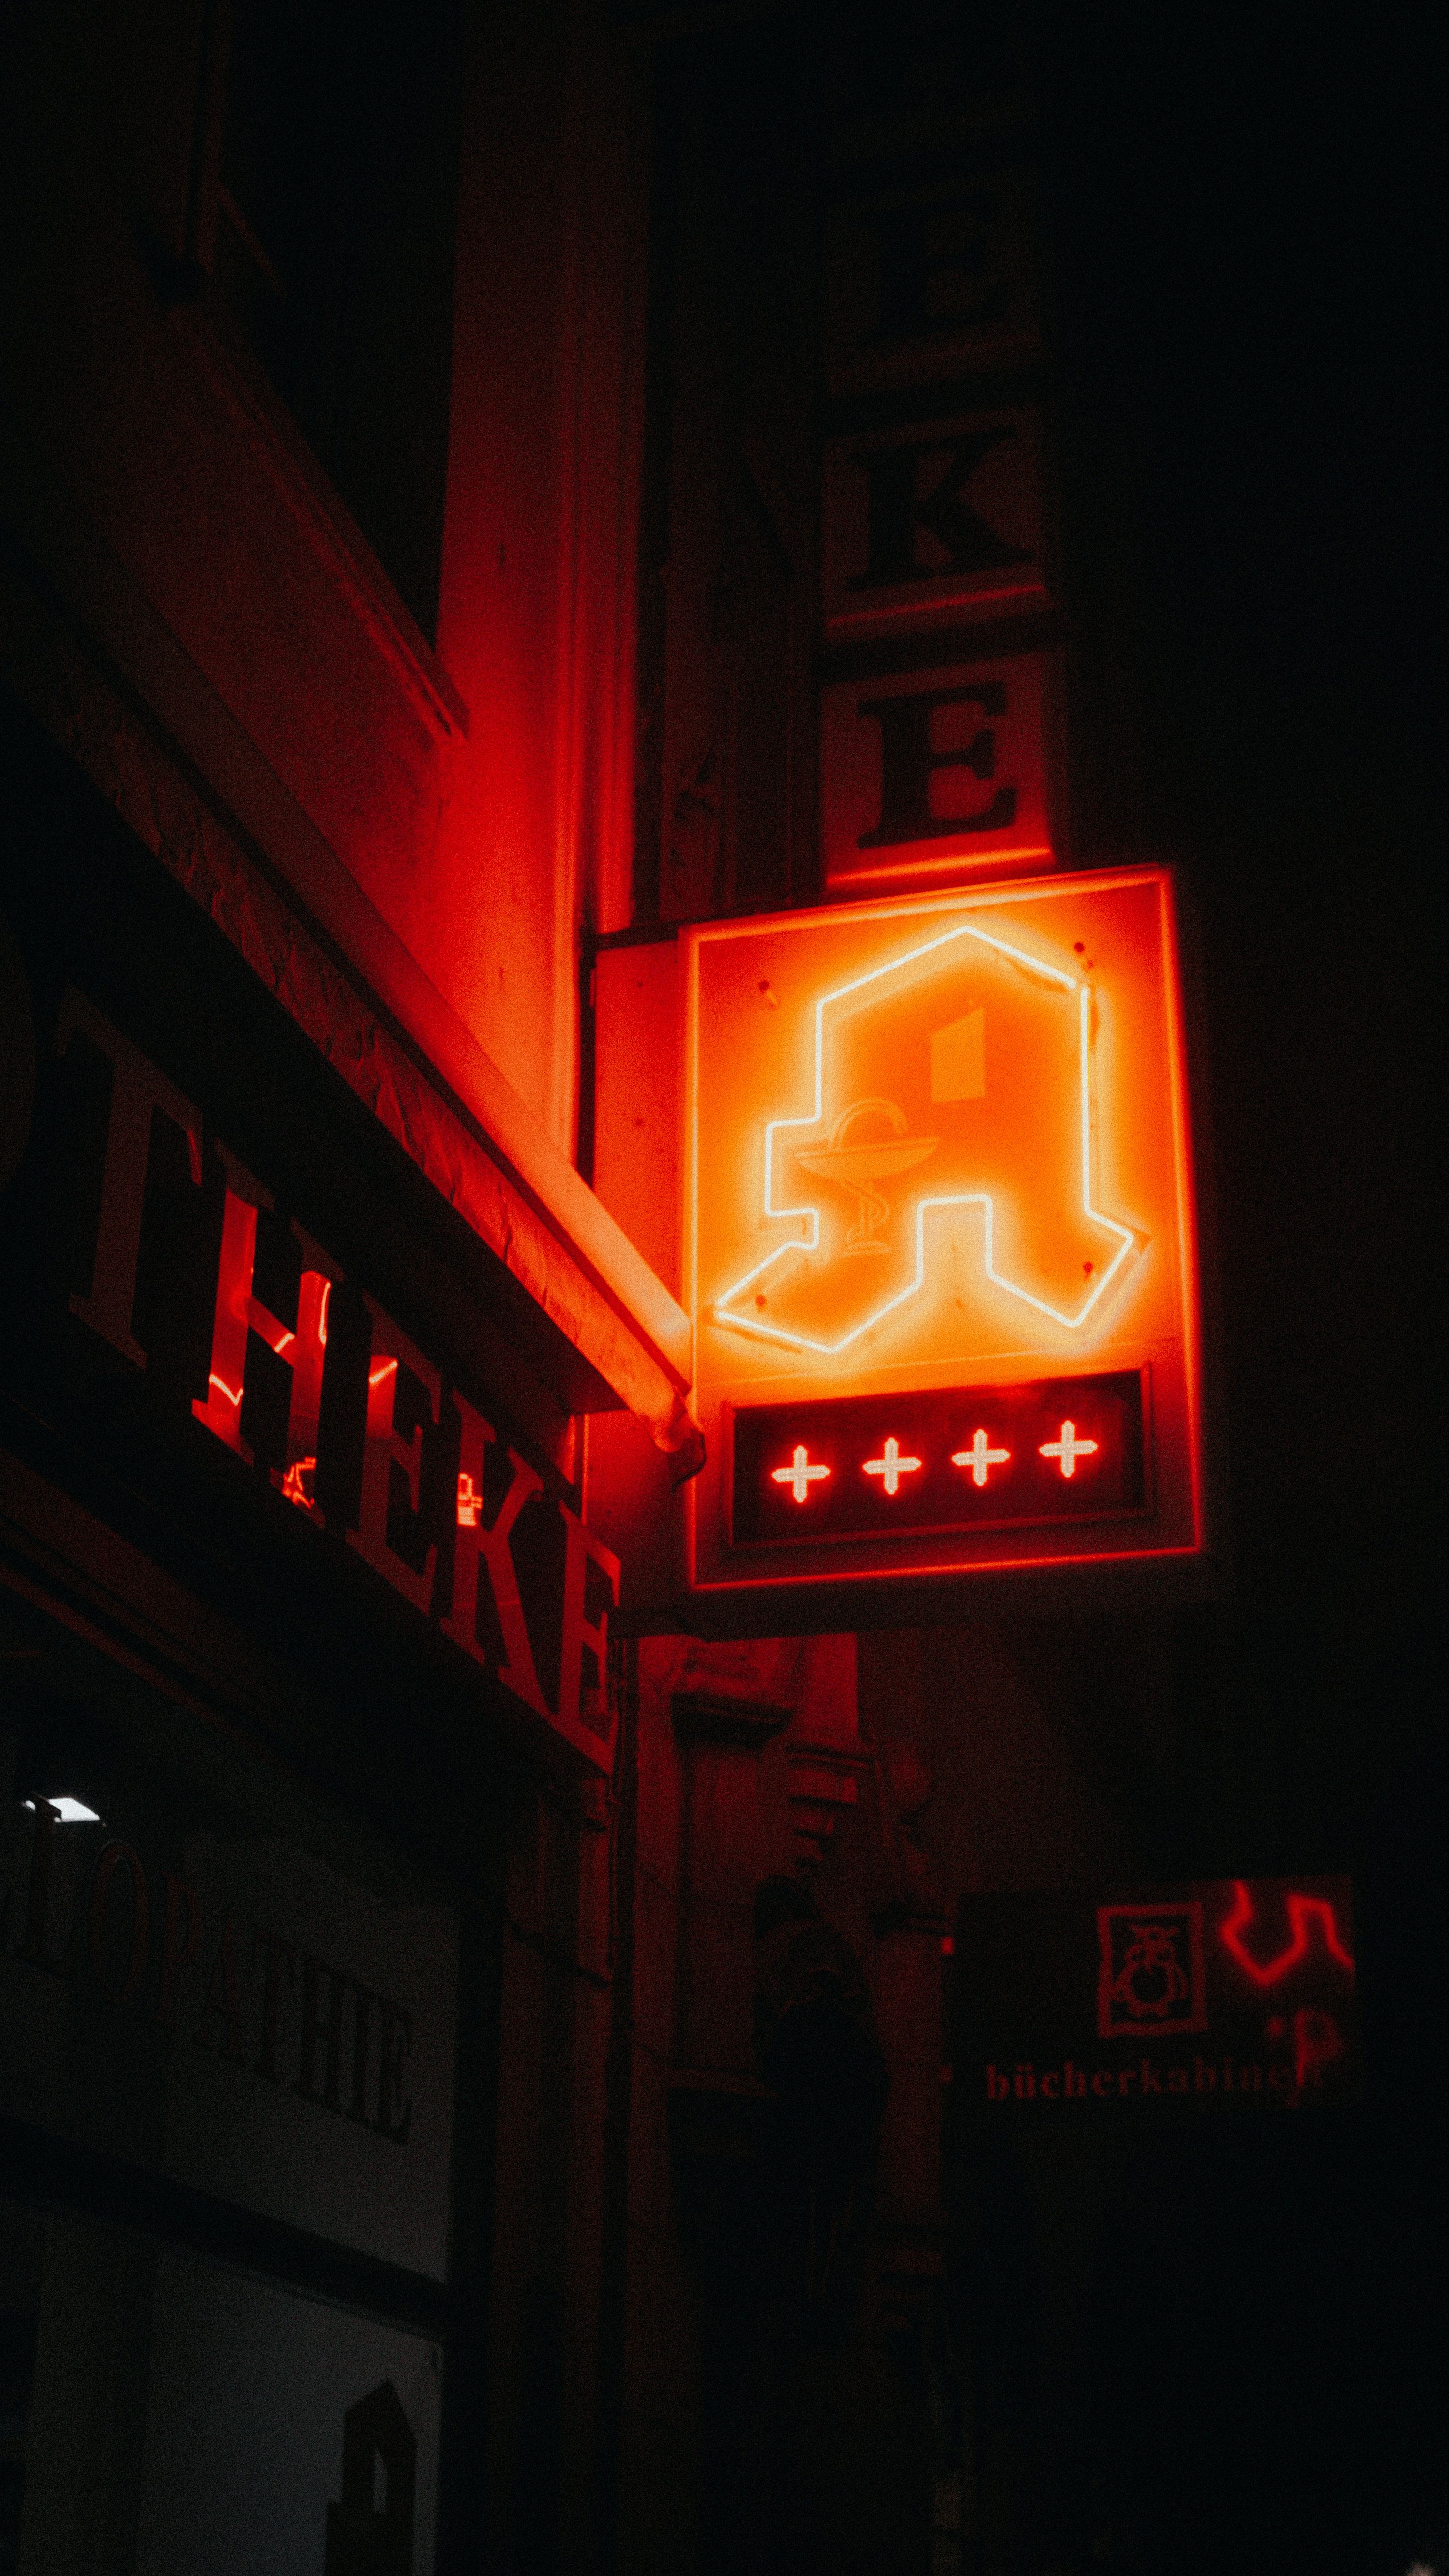 A neon sign on the side of building - Neon orange